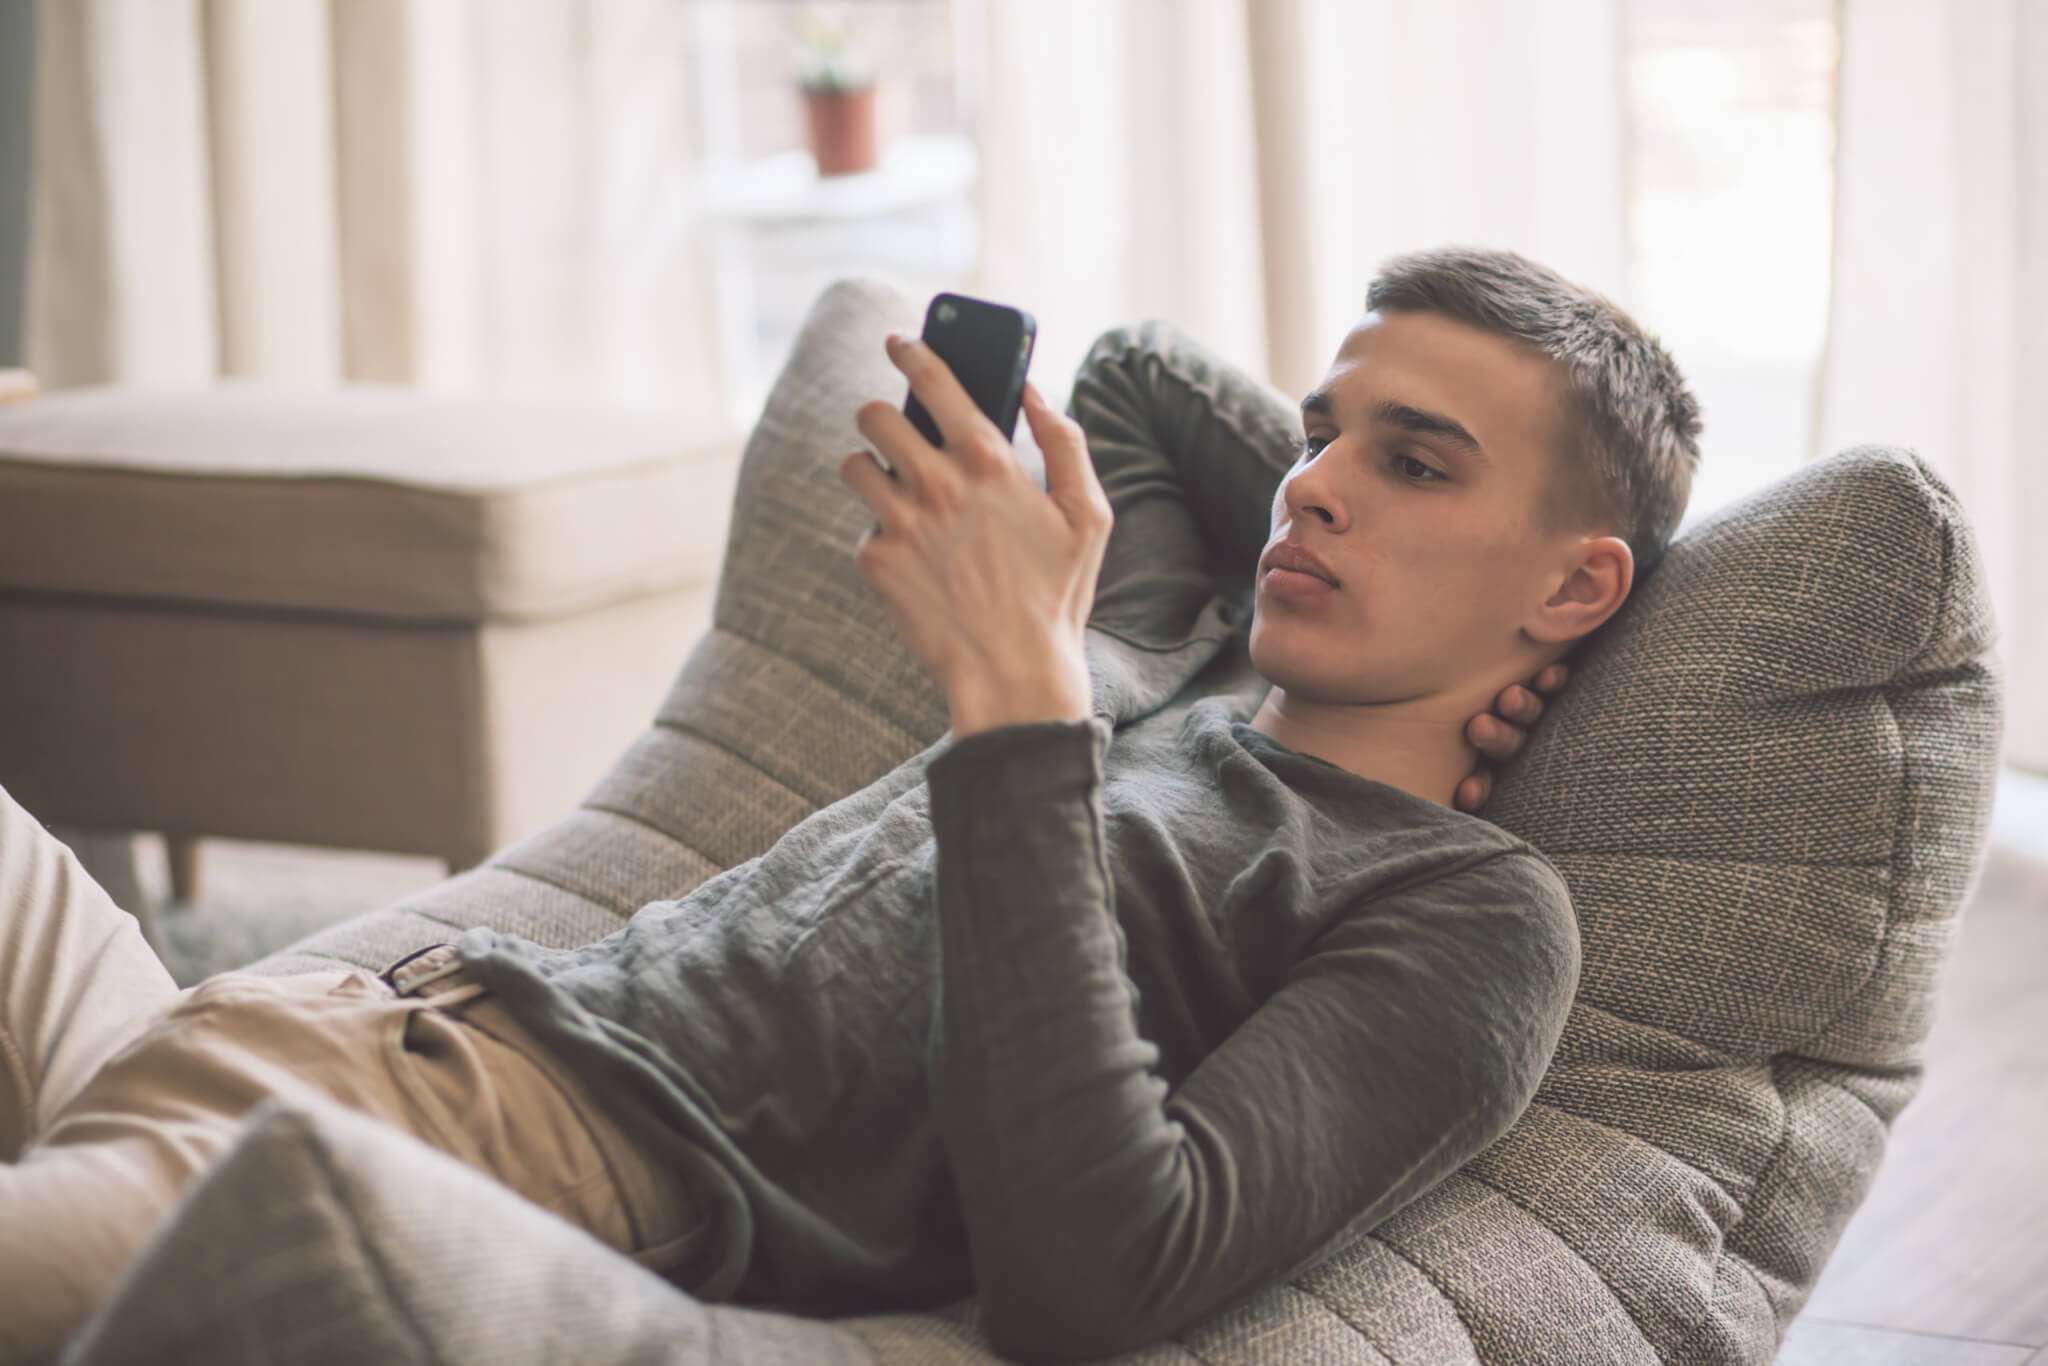 Teen sitting on couch looking at smartphone